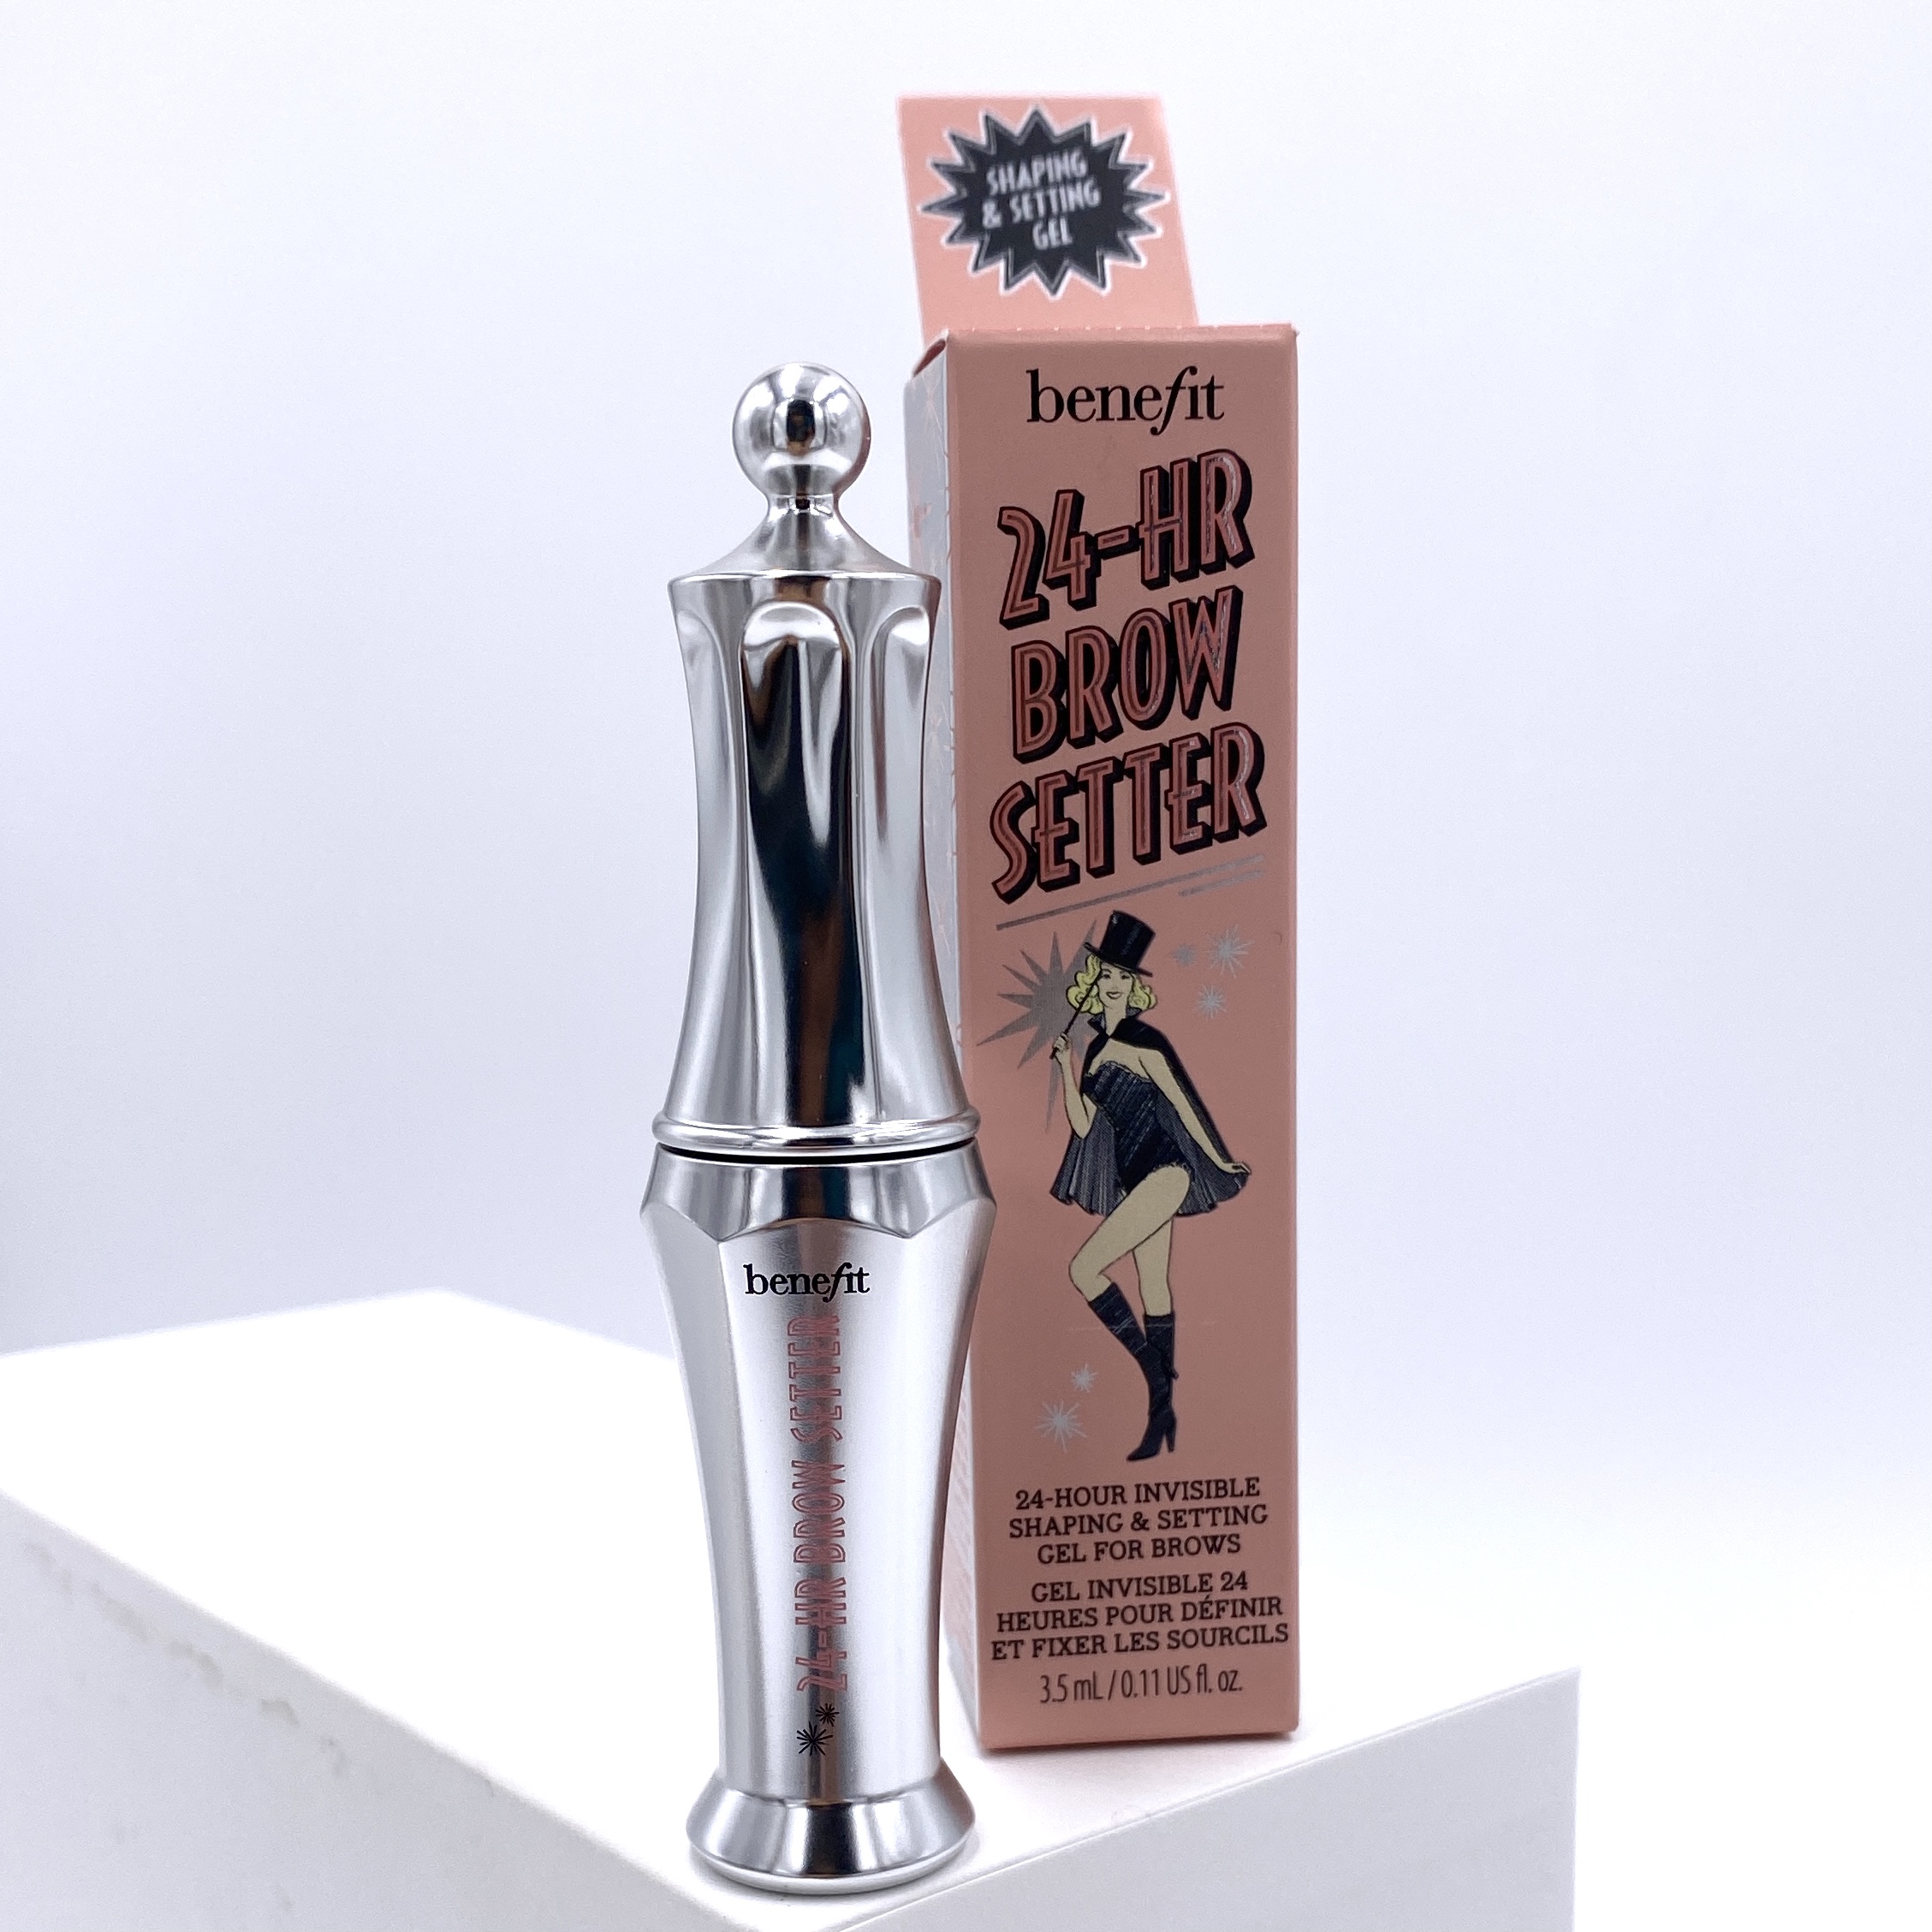 Benefit Cosmetics 24-Hour Brow Setter Clear Brow Gel Front for Ipsy Glam Bag February 2021